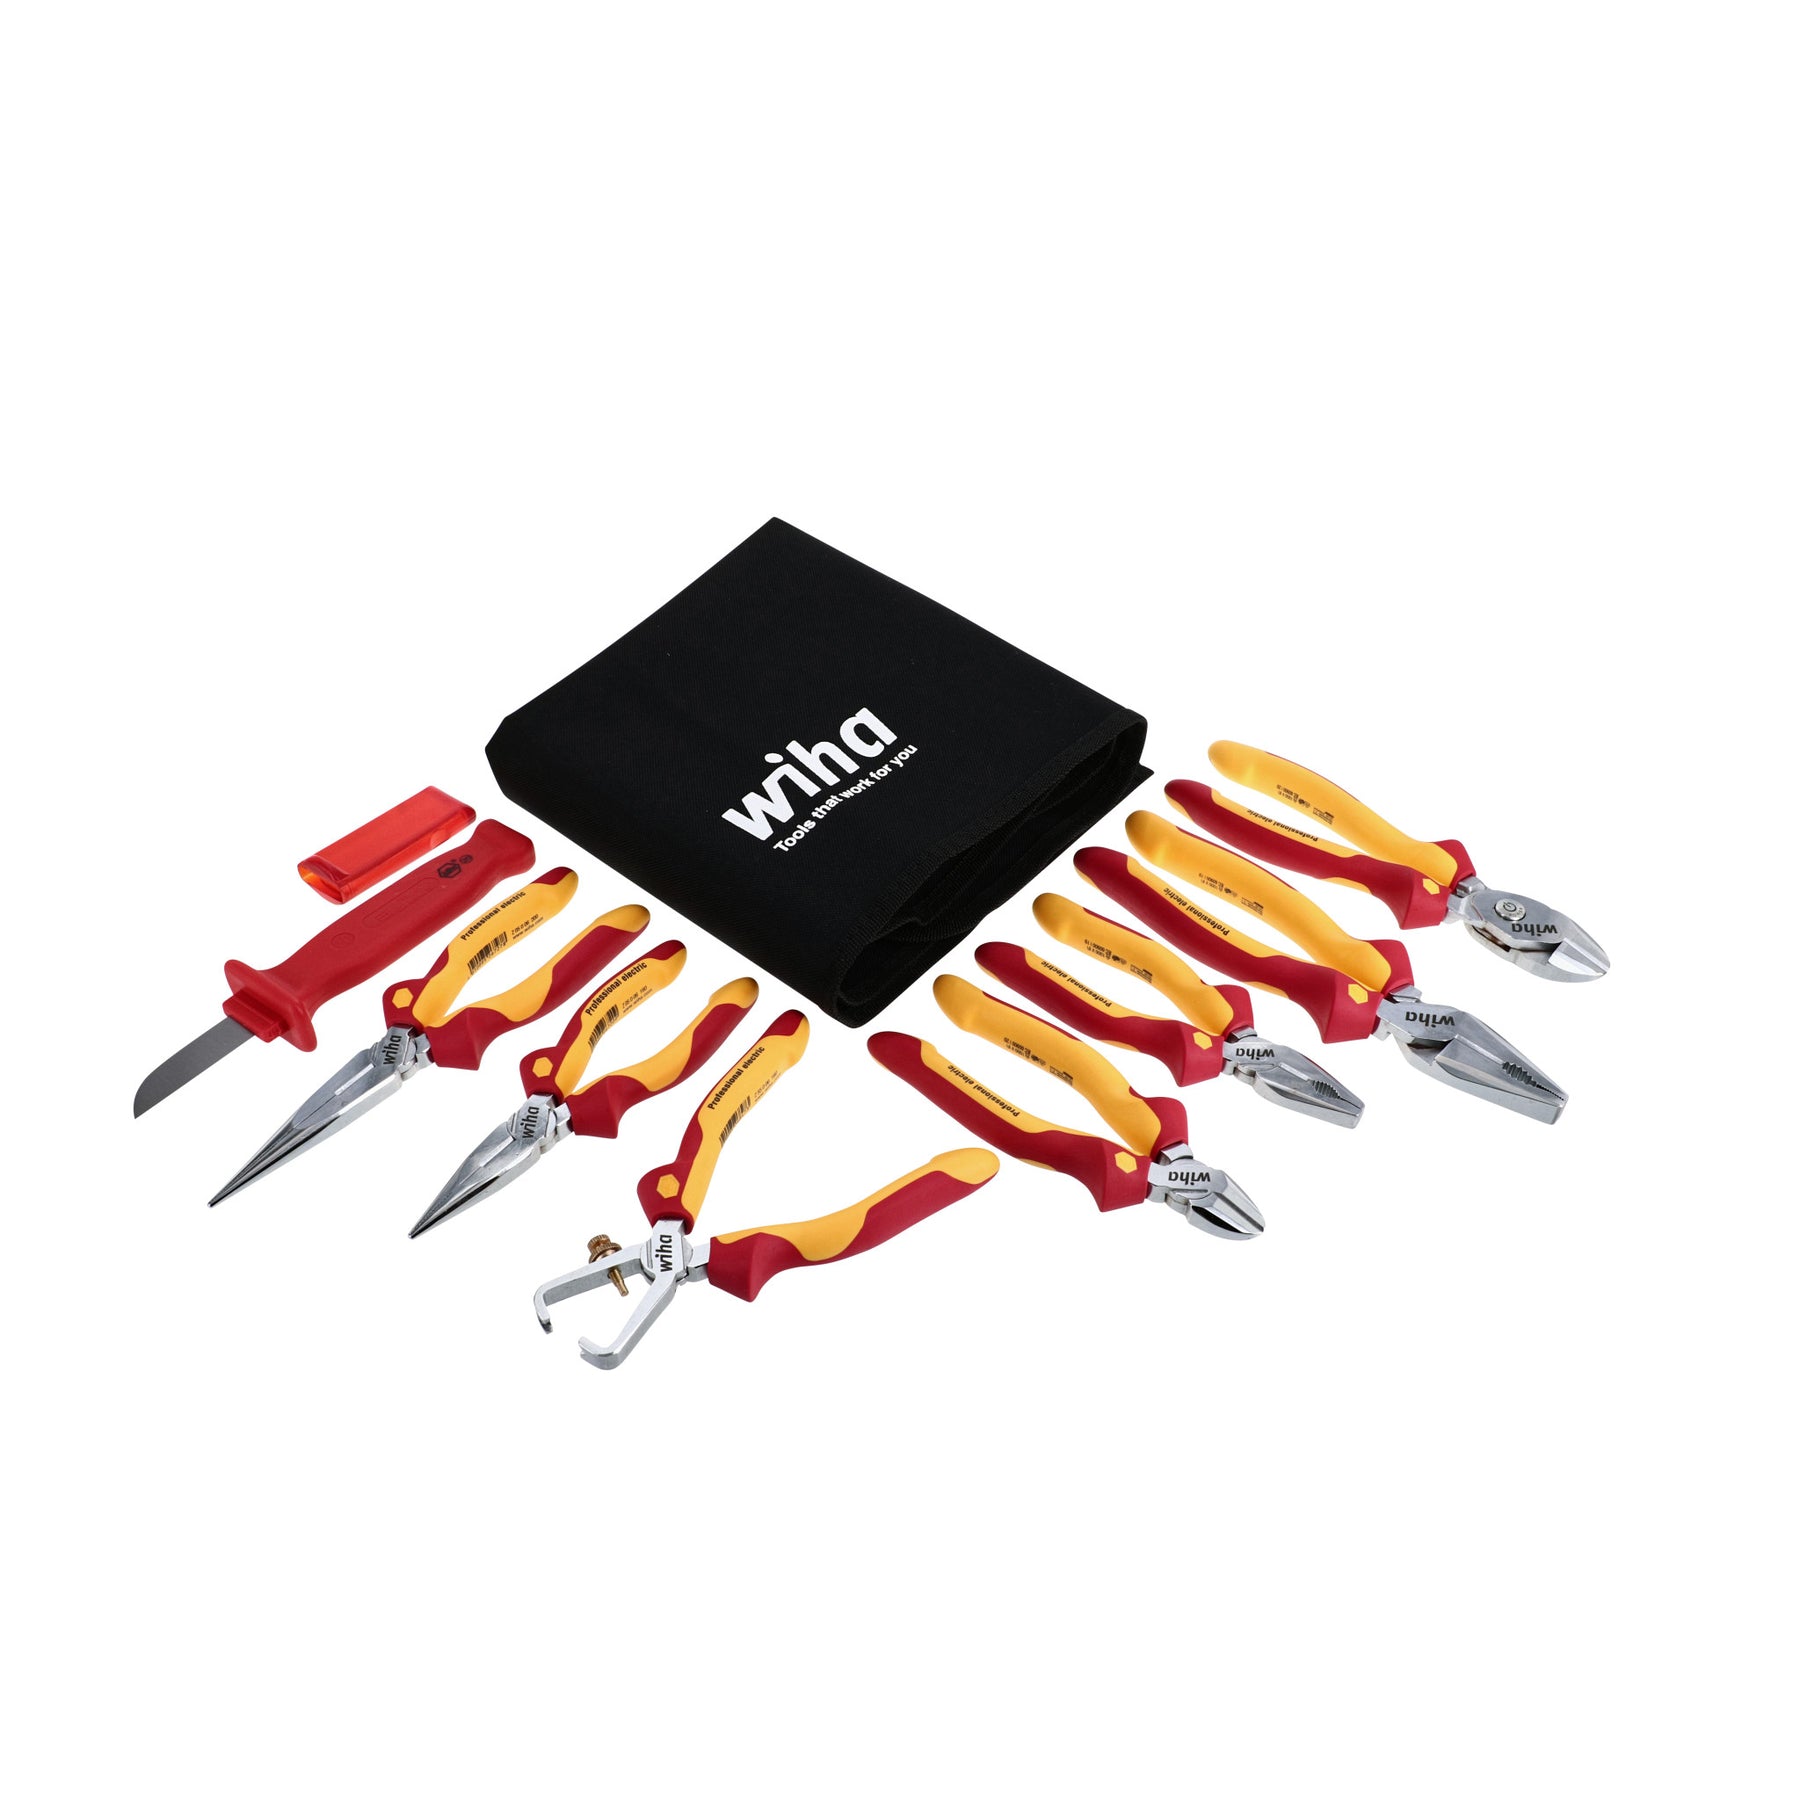 Wiha 32889 8 Piece Insulated Pliers and Cutters Set